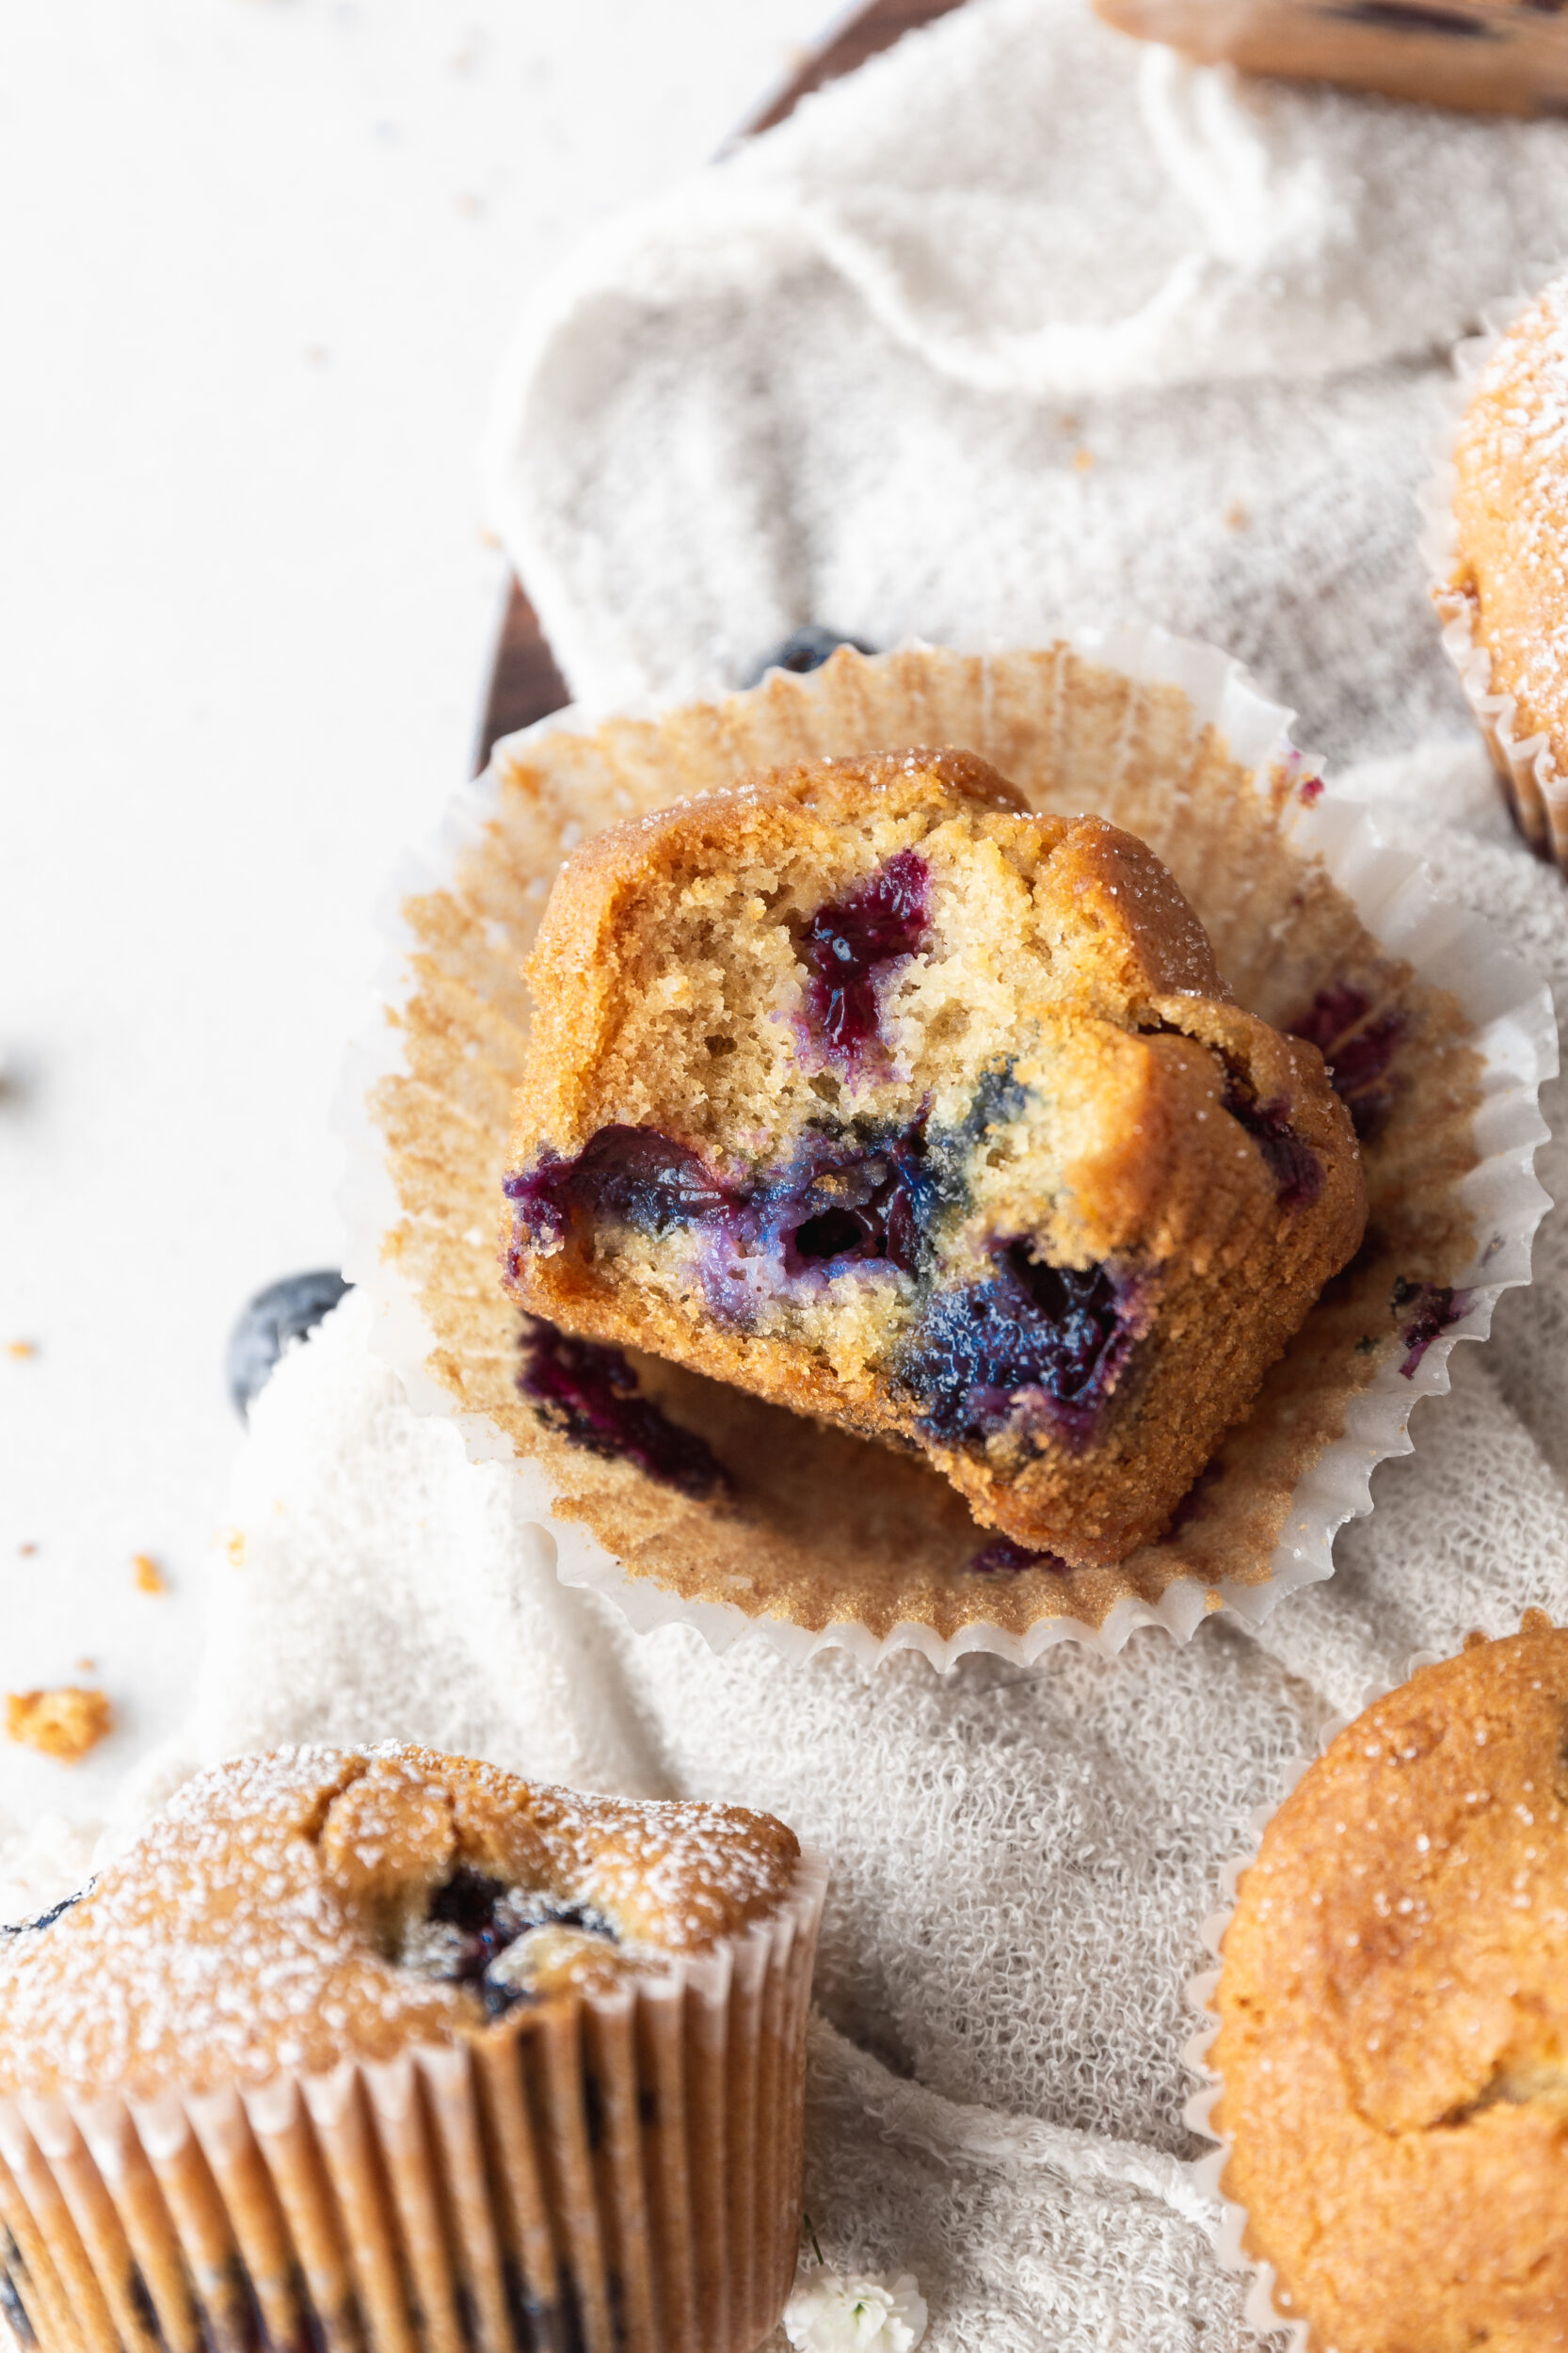 A side shot of a dairy-free blueberry muffin with a bit taken out of it.